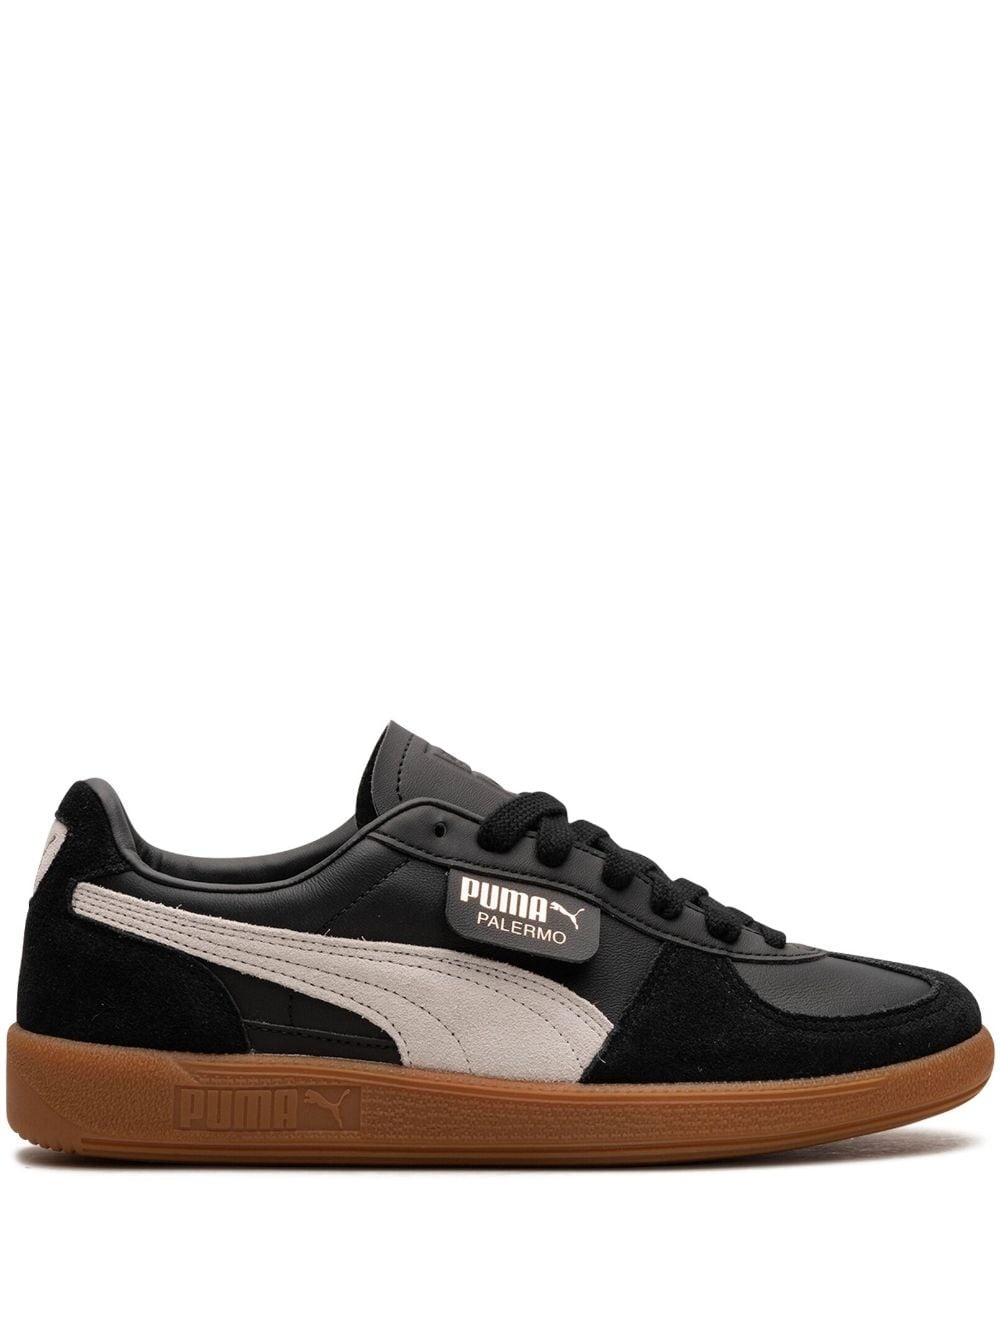 Palermo "Puma Black/Feather Gray/Gum" sneakers - 1